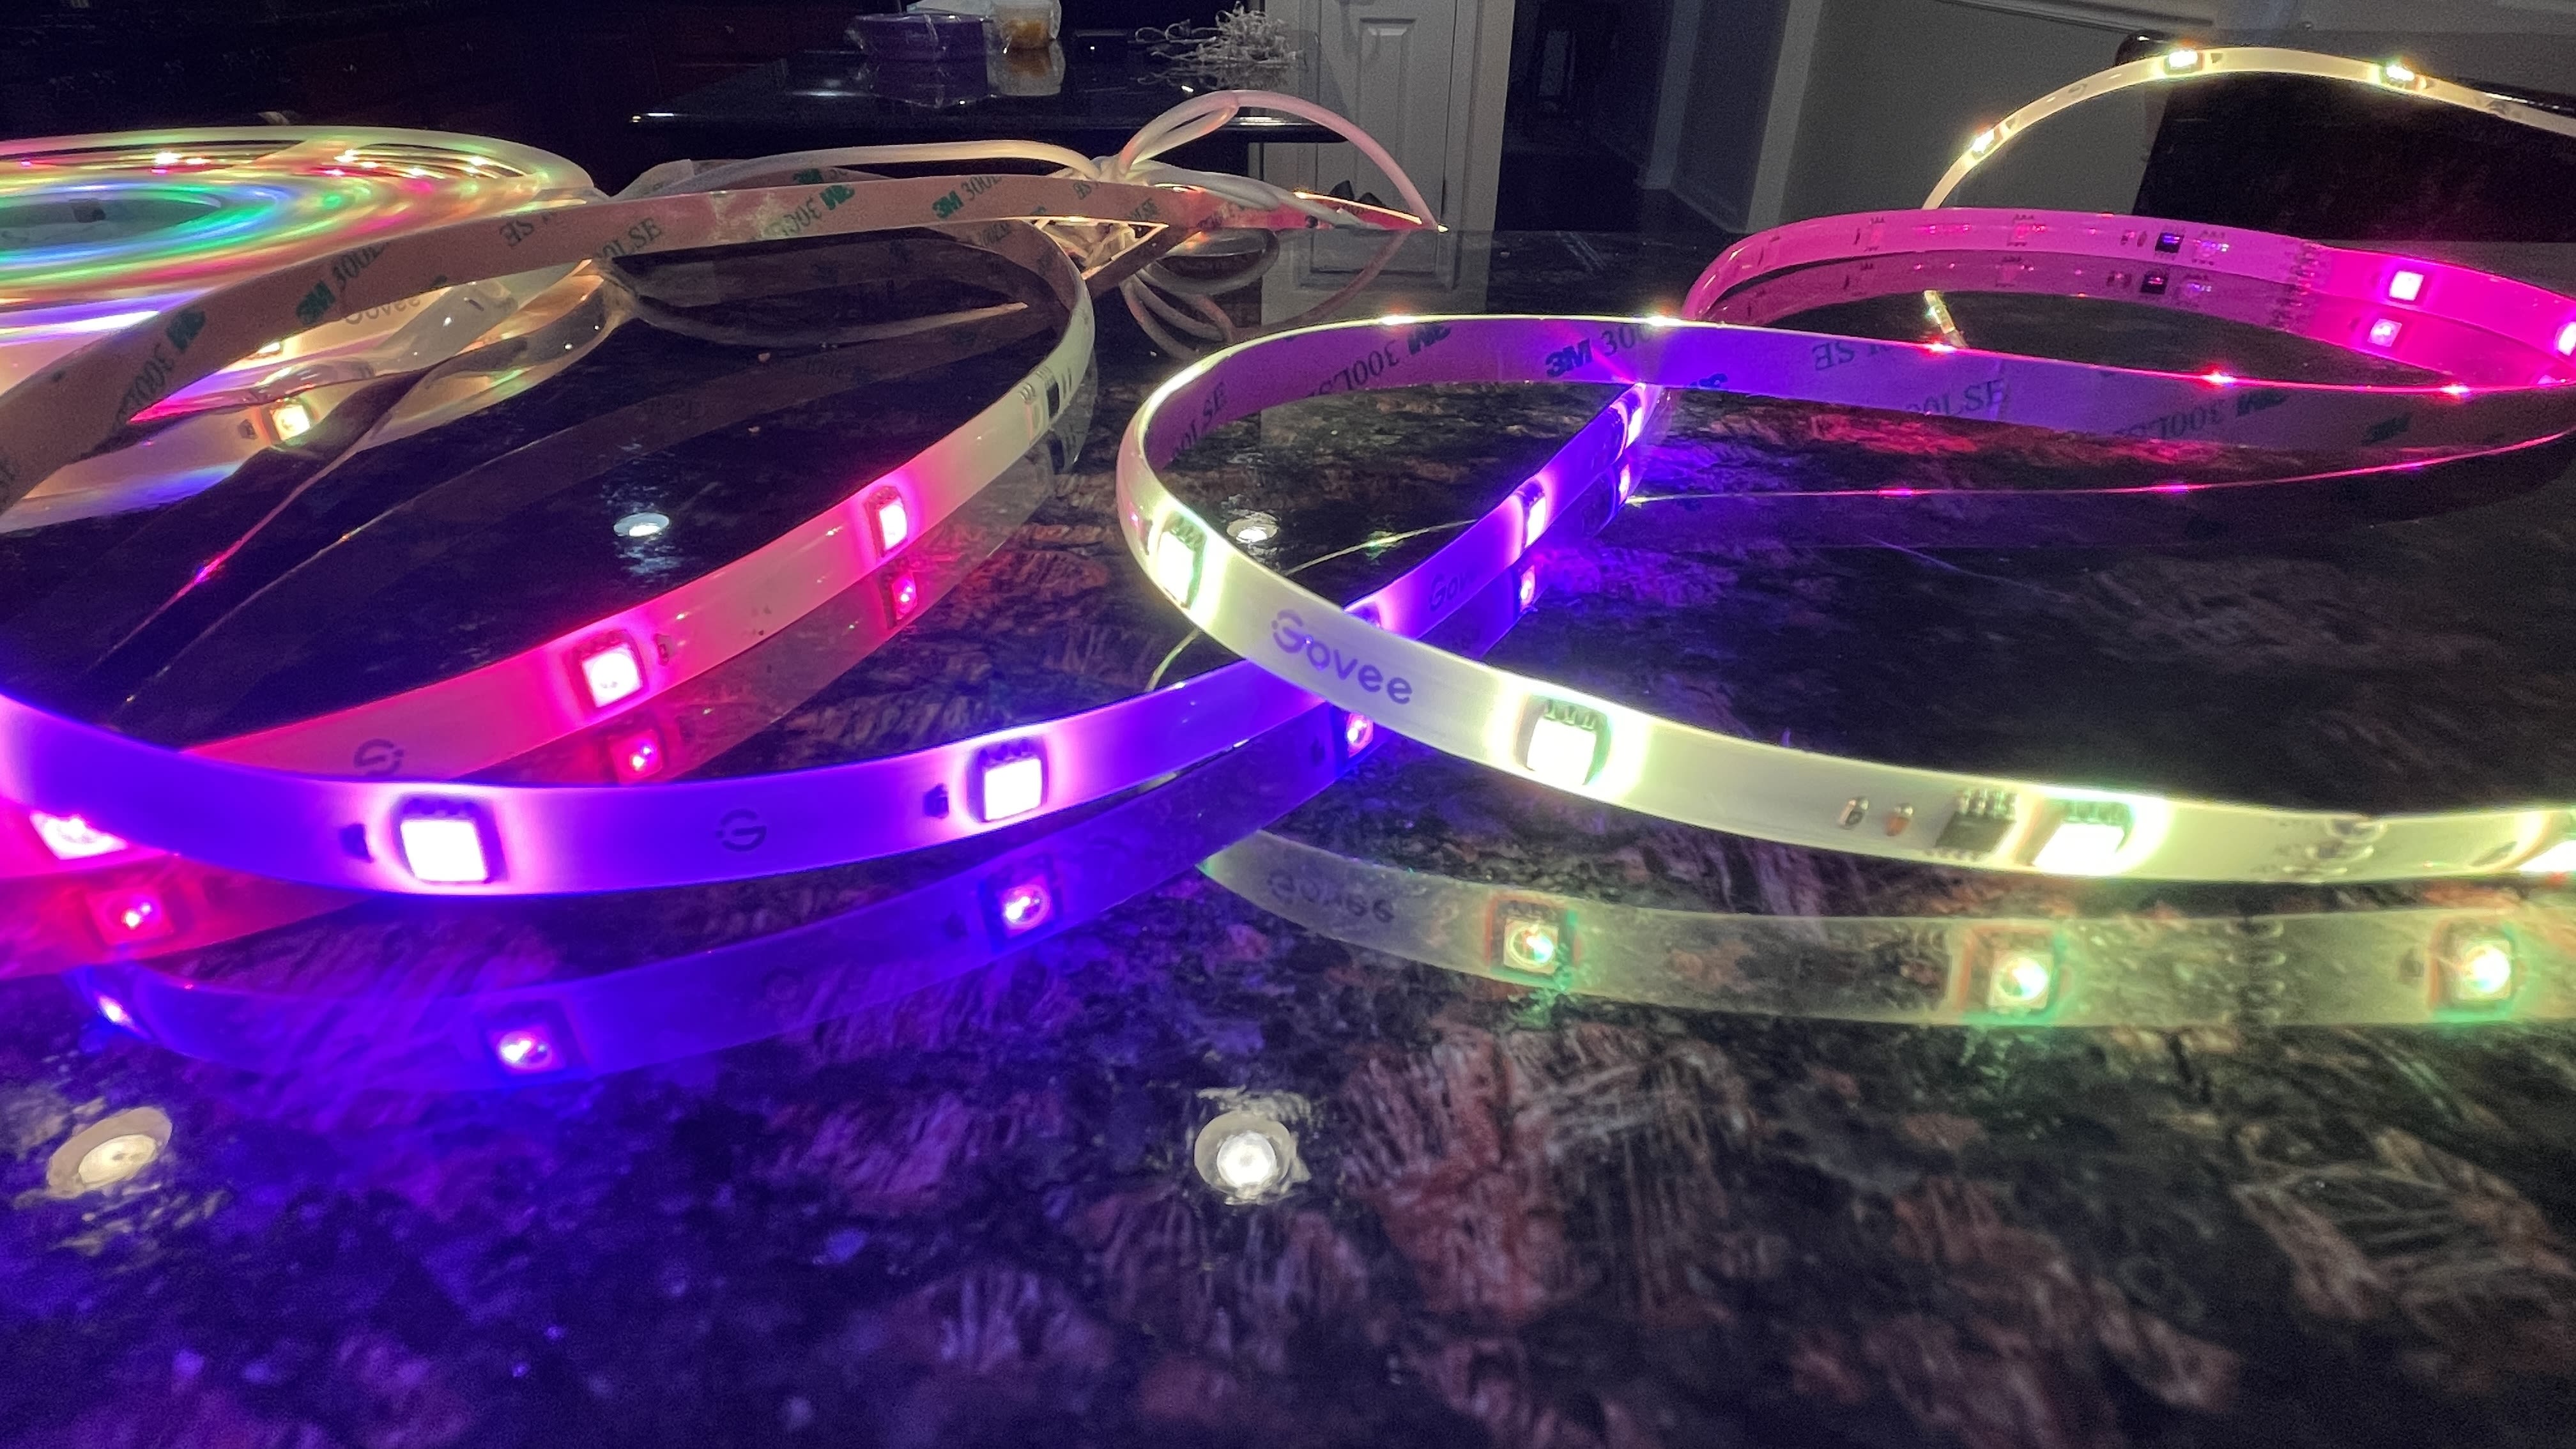 How to Install Hue Lightstrips Behind Your TV - Hue Home Lighting